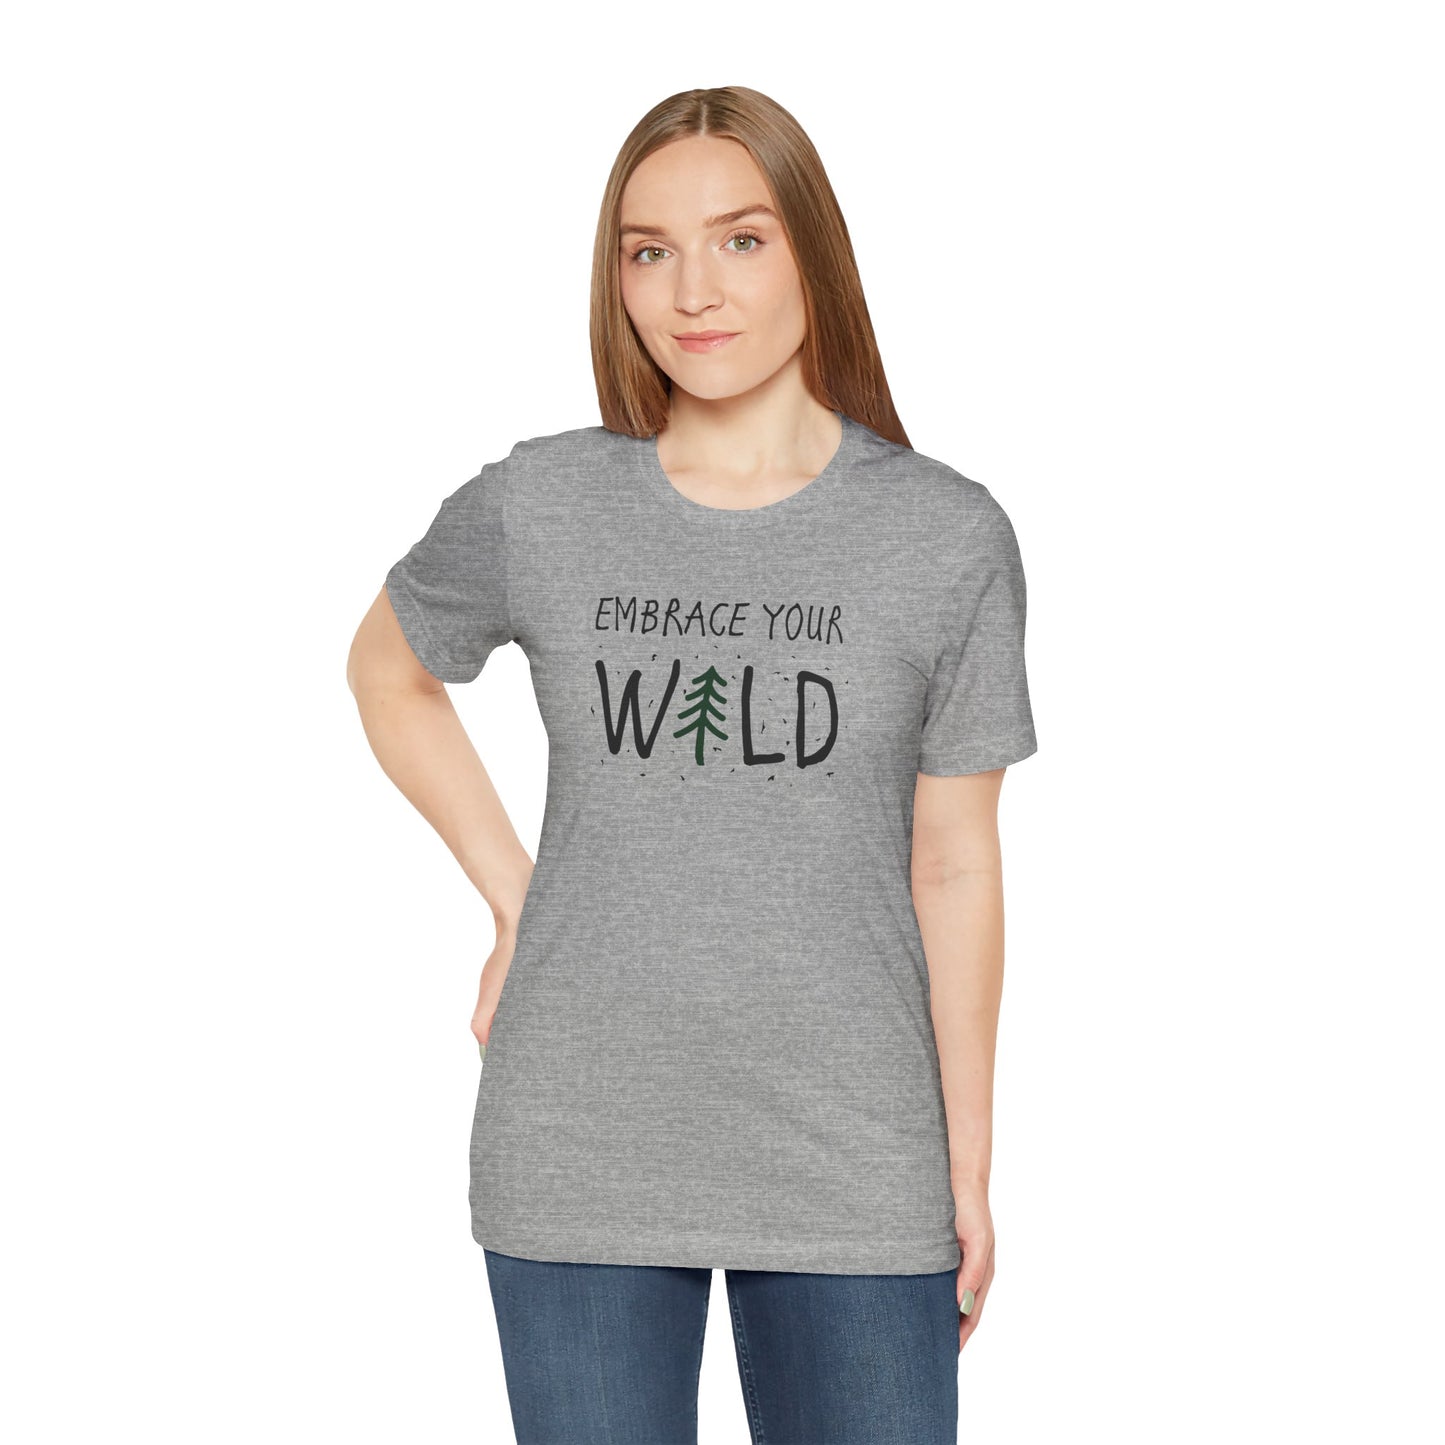 Embrace Your Wild T-Shirt, Outdoor Tee, Hiking T-Shirt, Camping T-Shirt, Pine Tree T-Shirt